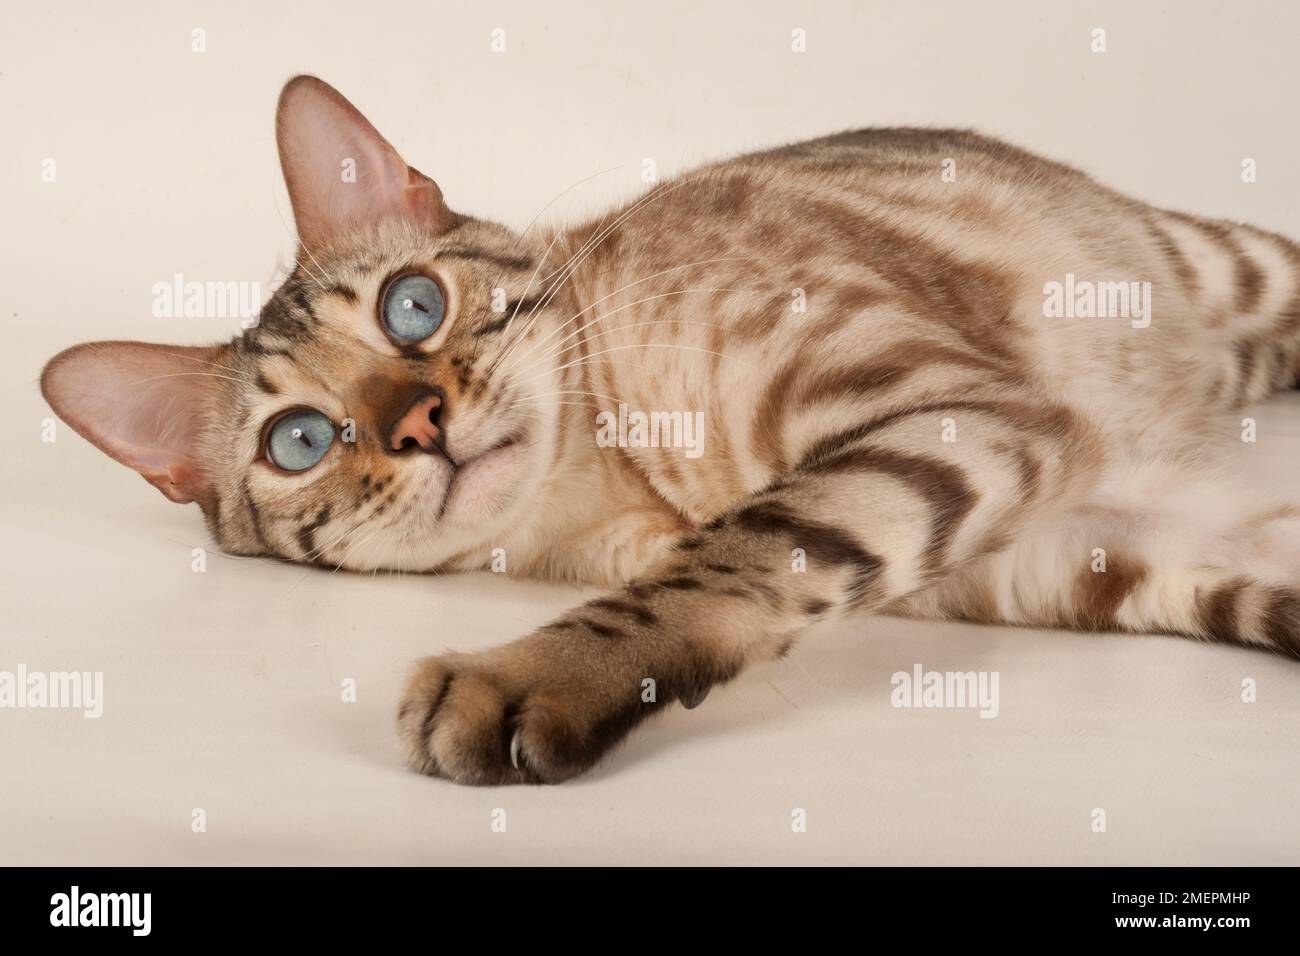 Brown rosetted Bengal cat with blue eyes, lying down, looking at camera Stock Photo